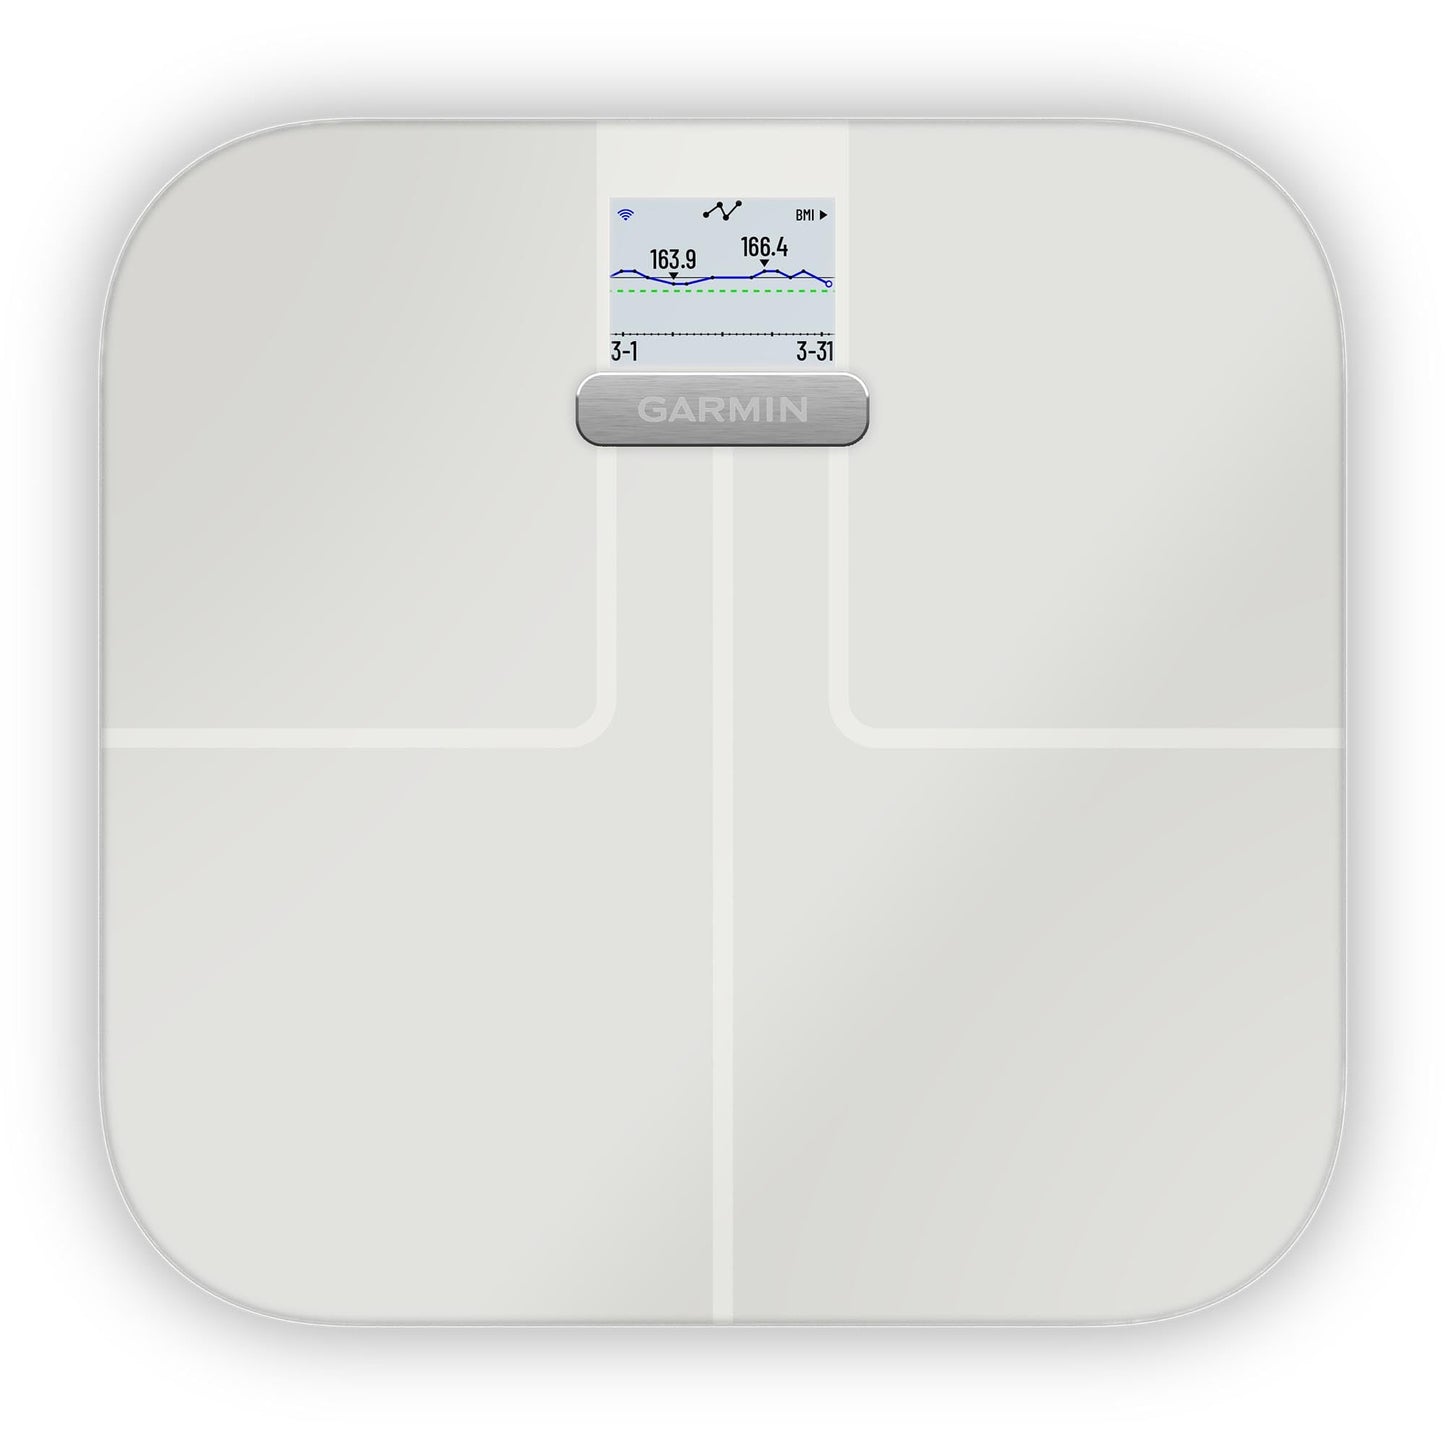 Garmin Index S2, Smart Scale with Wireless Connectivity, Measure Body Fat, Muscle, Bone Mass, Body Water% and More, White